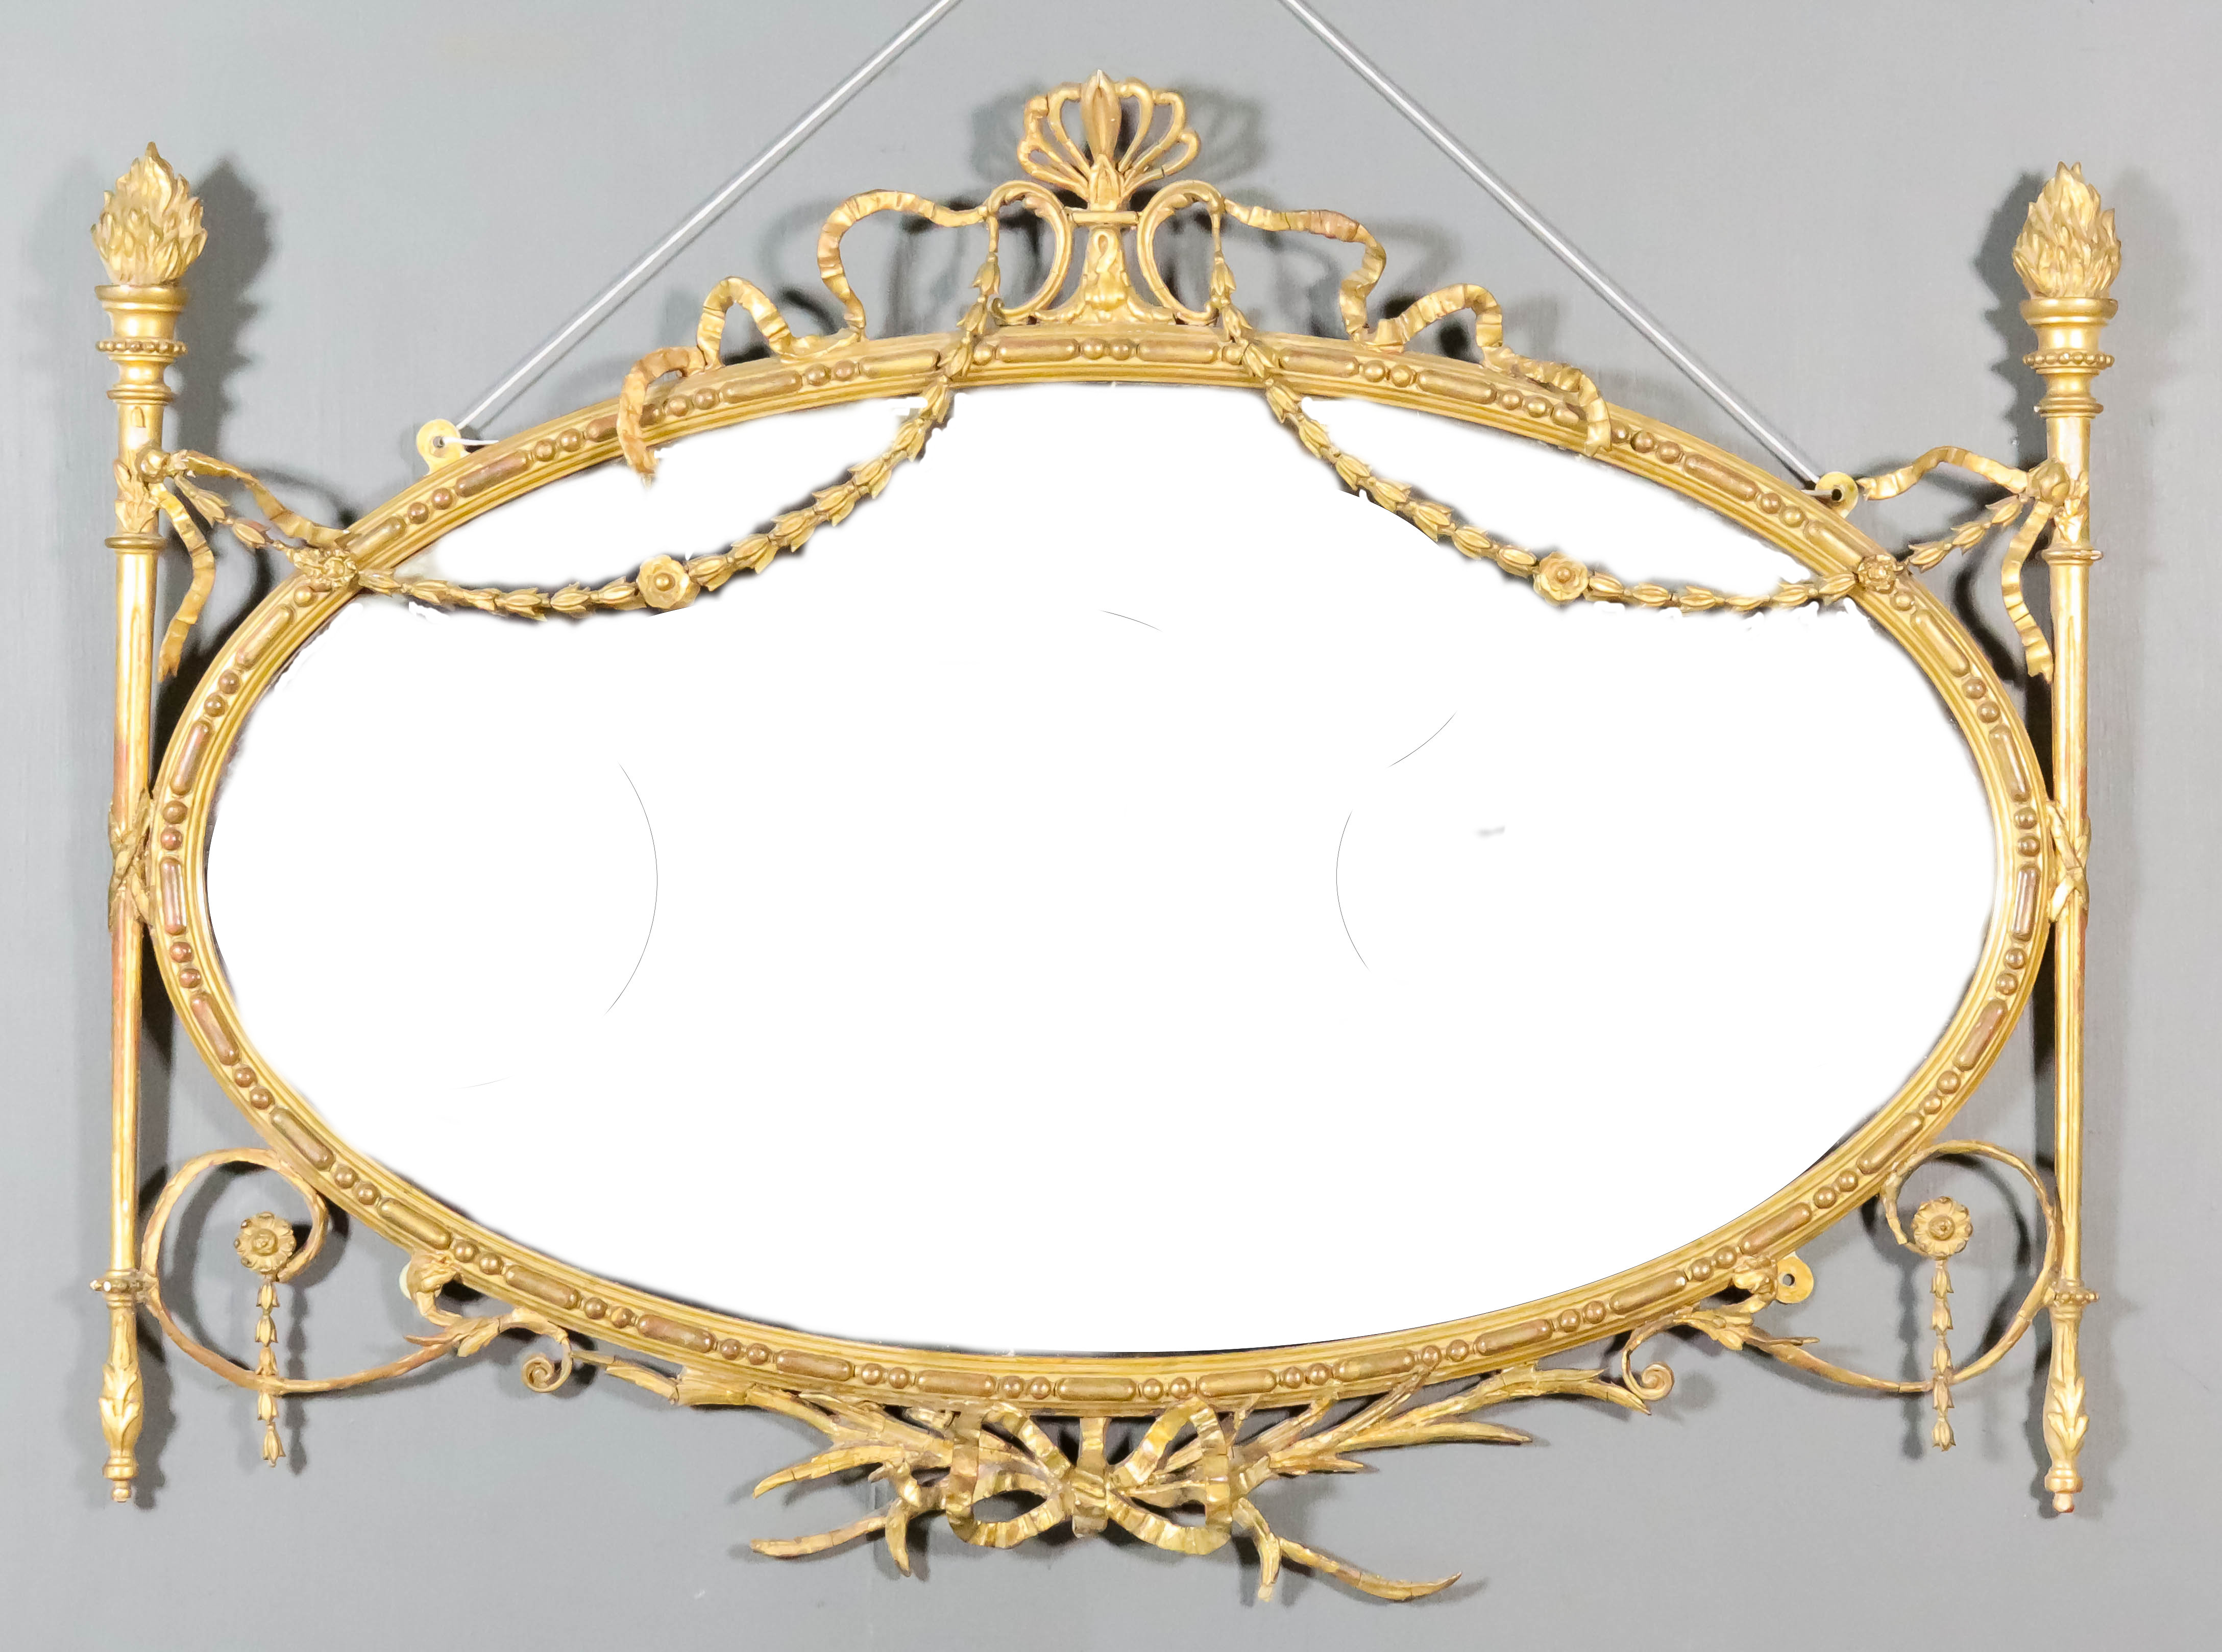 A Late 19th/Early 20th Century Gilt Framed Oval Wall Mirror, in the Neo-Classical manner, with